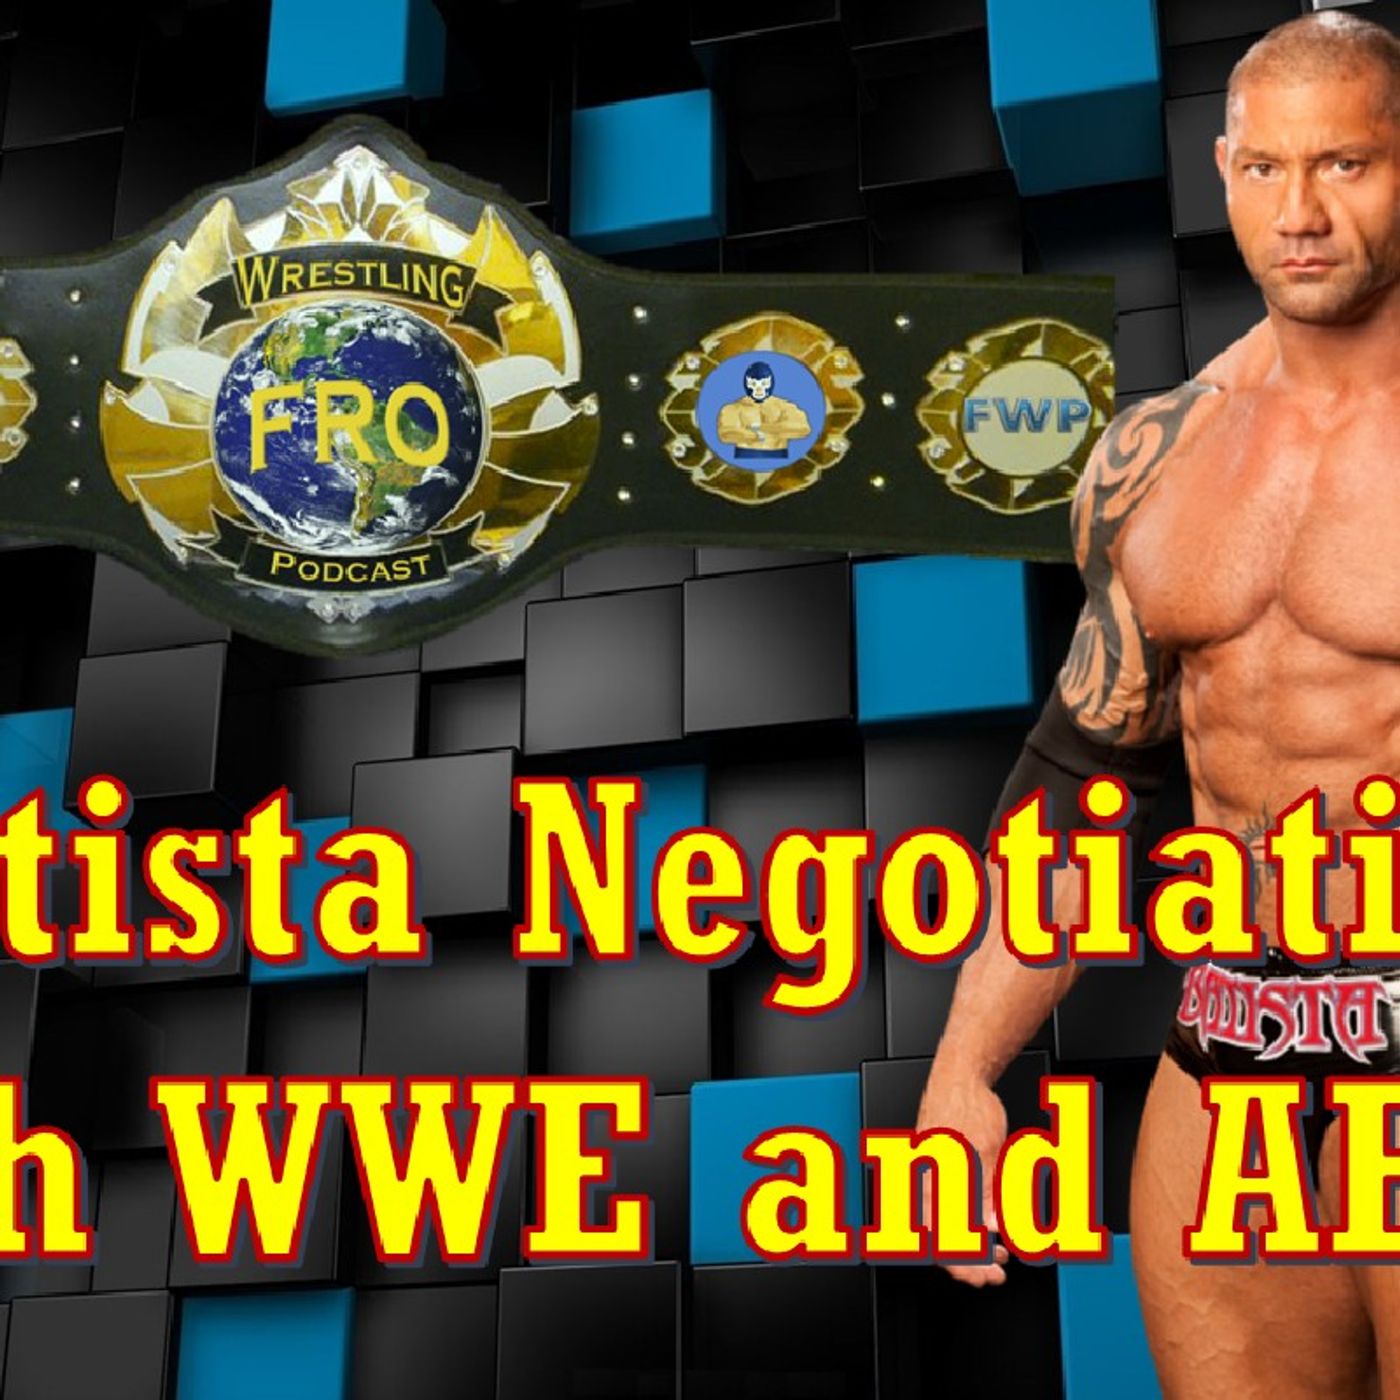 Batista Negotiating With WWE and AEW?